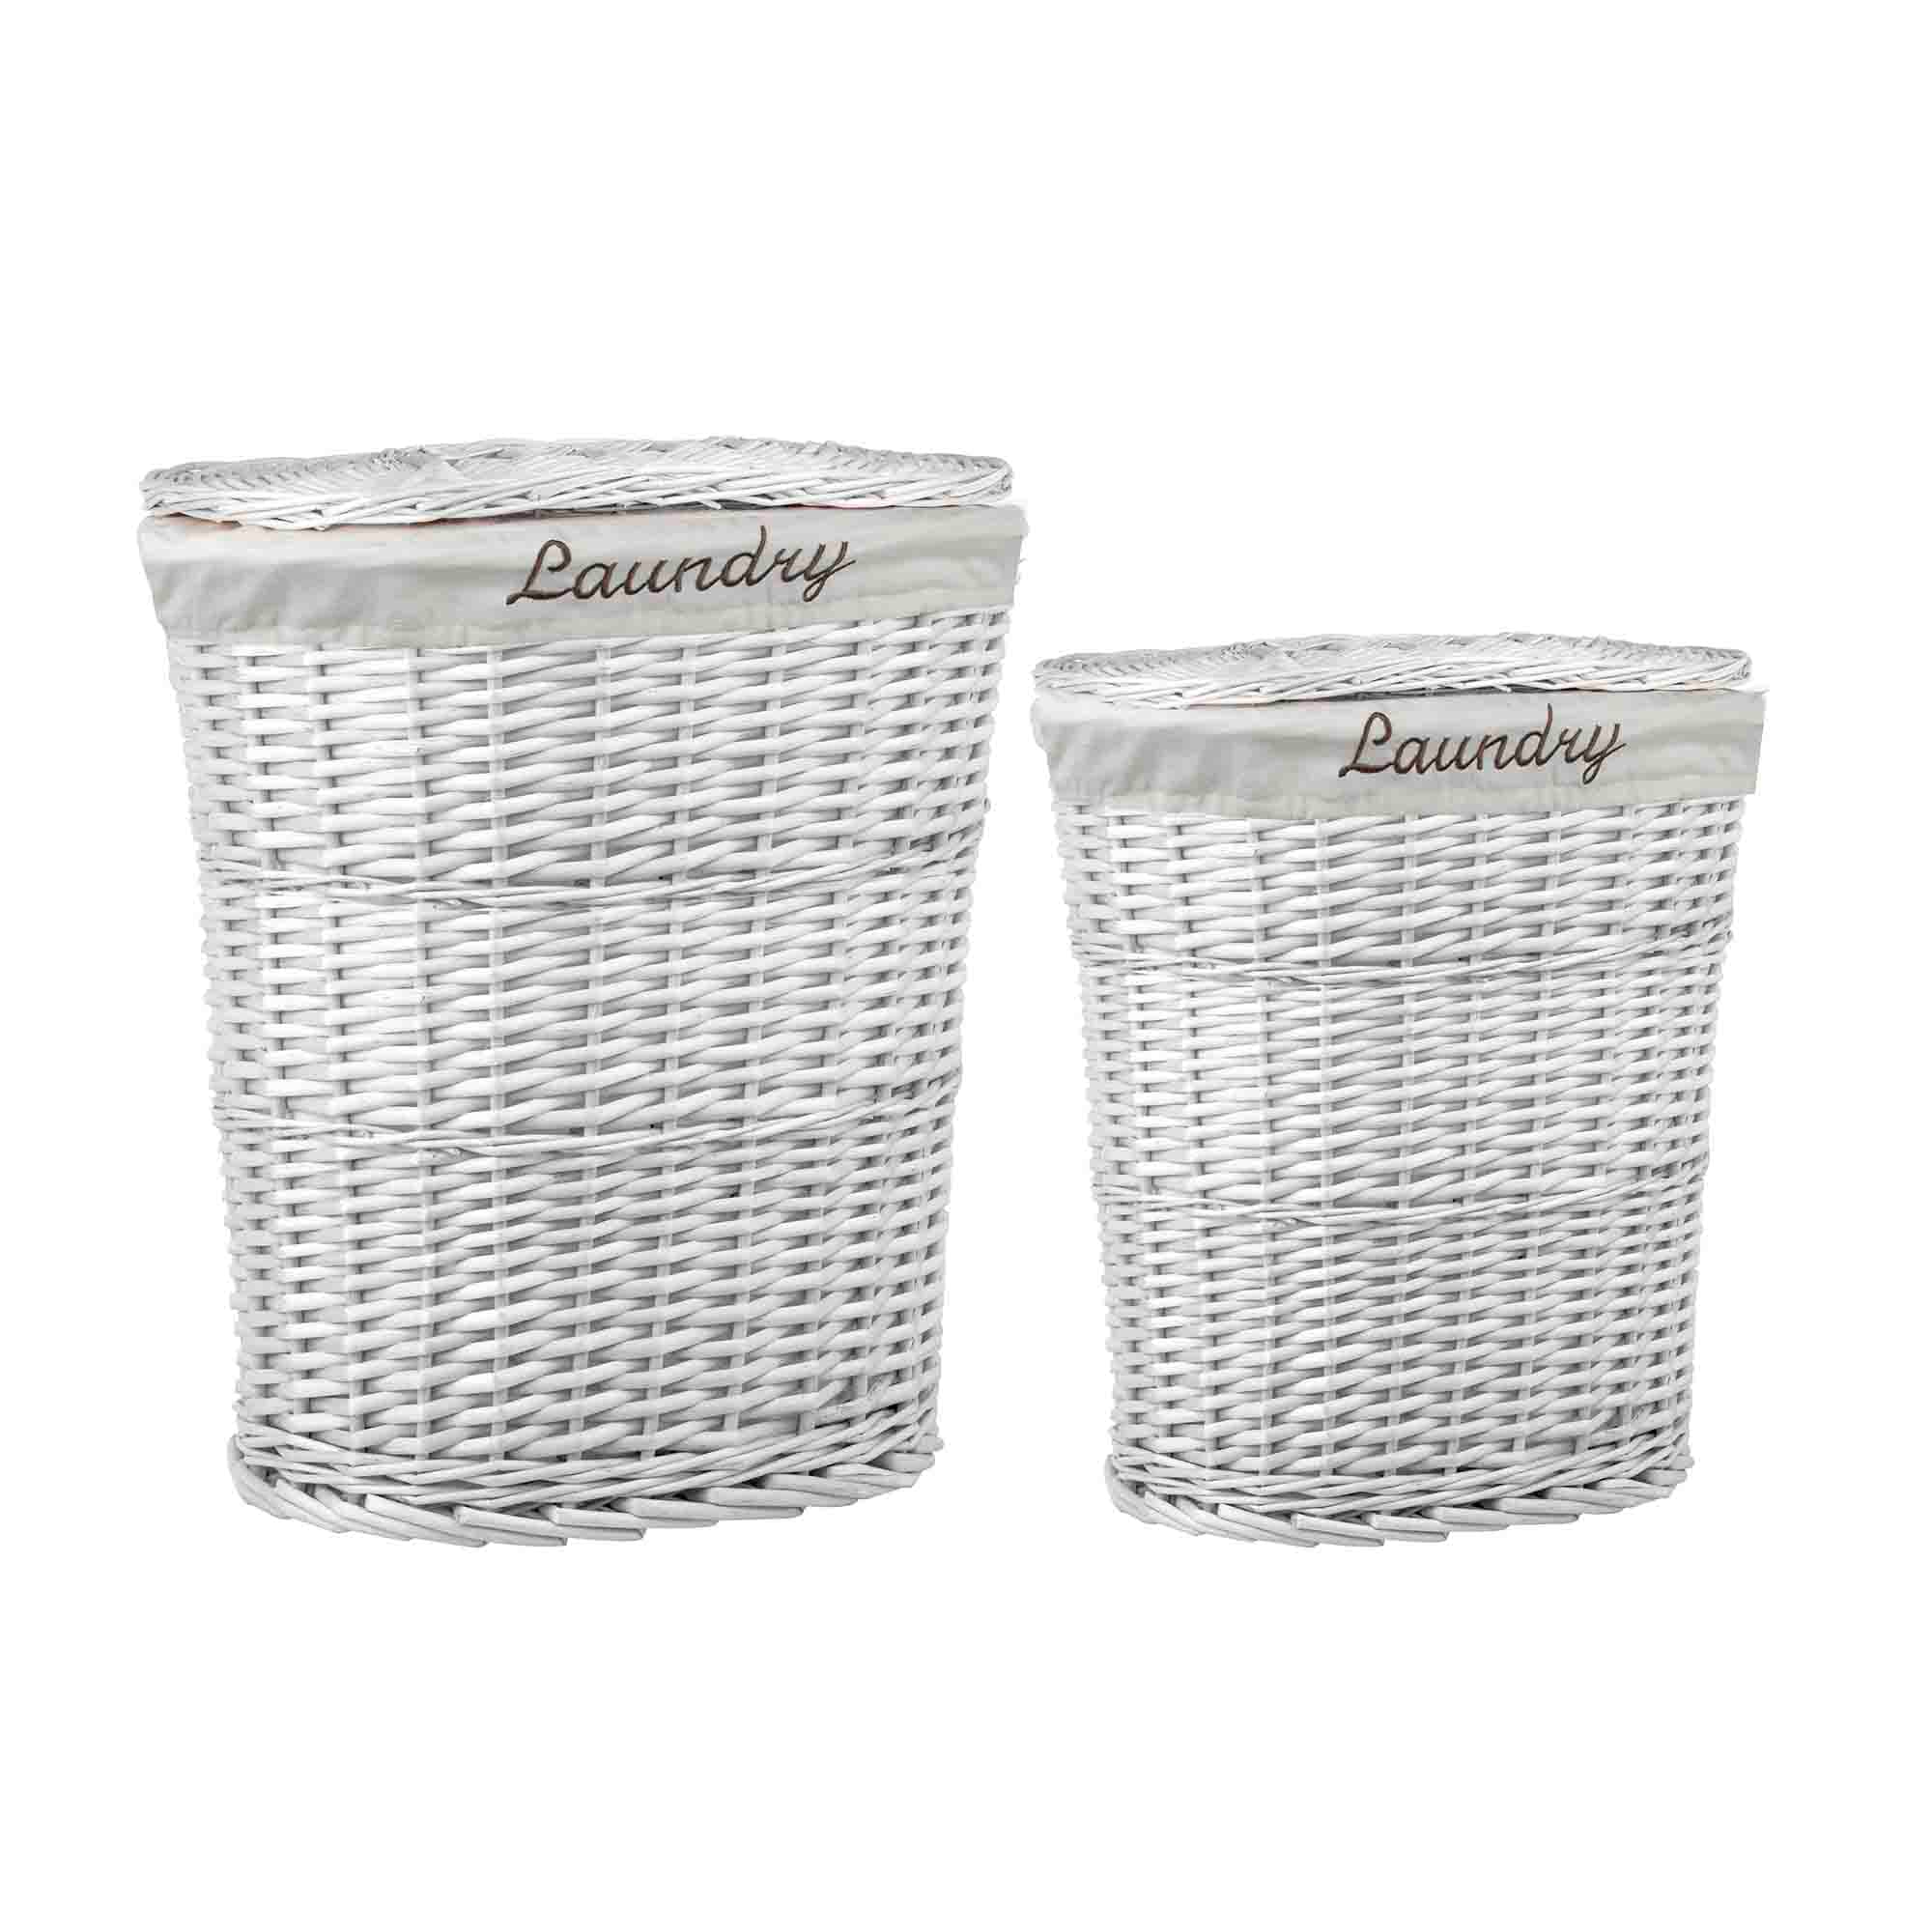 Home Basics  2 Piece  Wicker Hamper with Liner, White $40.00 EACH, CASE PACK OF 1